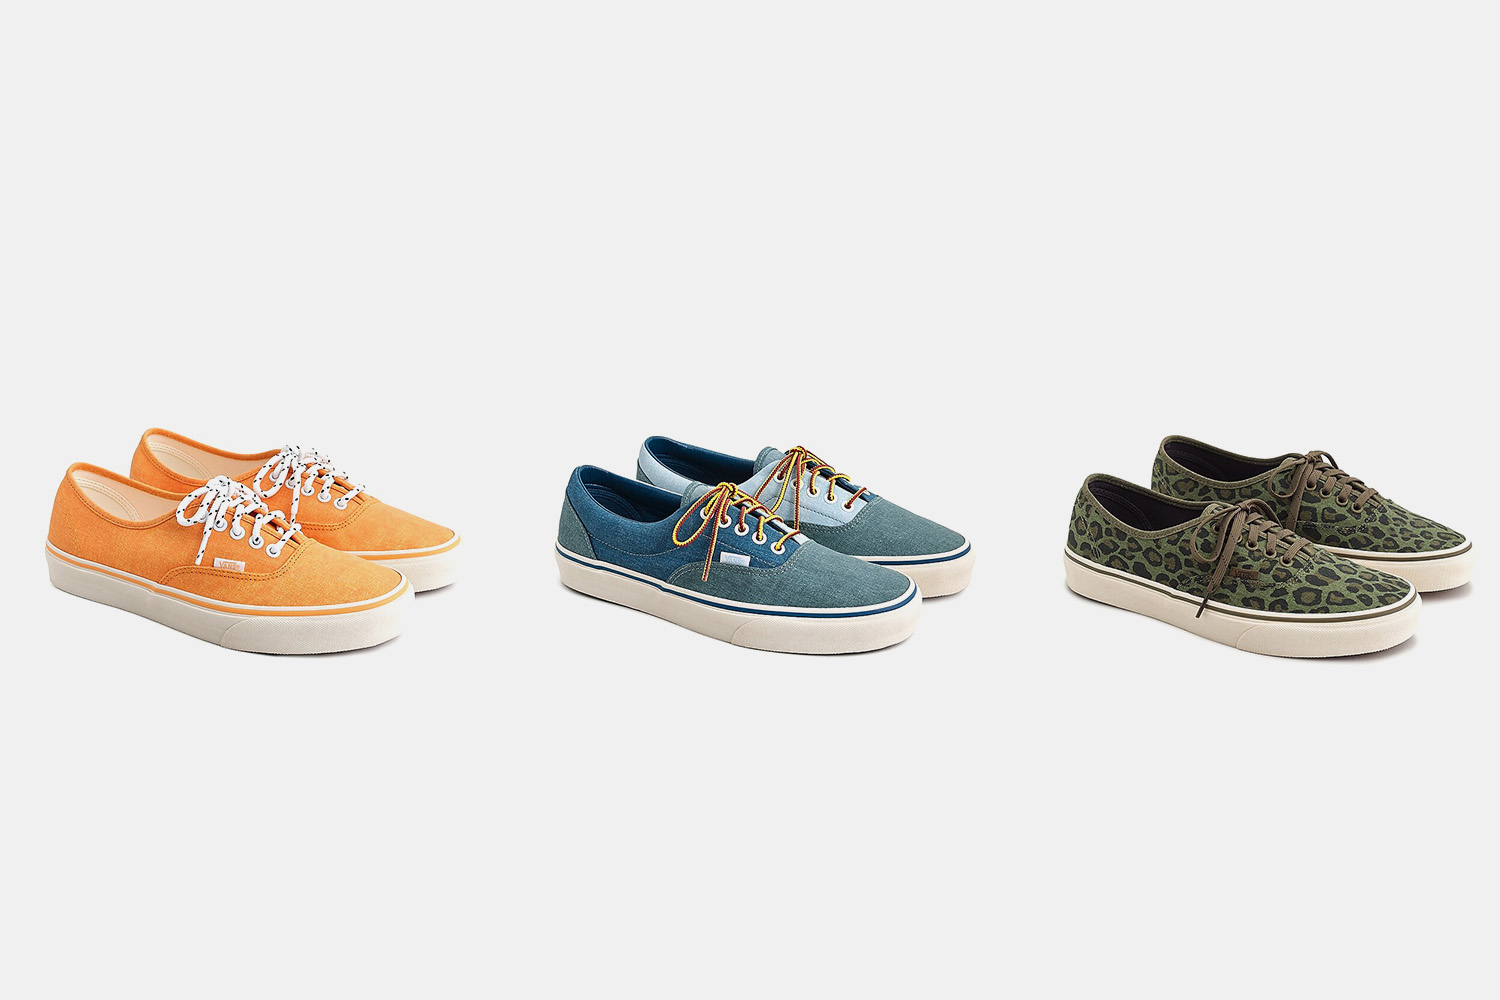 discontinued vans styles